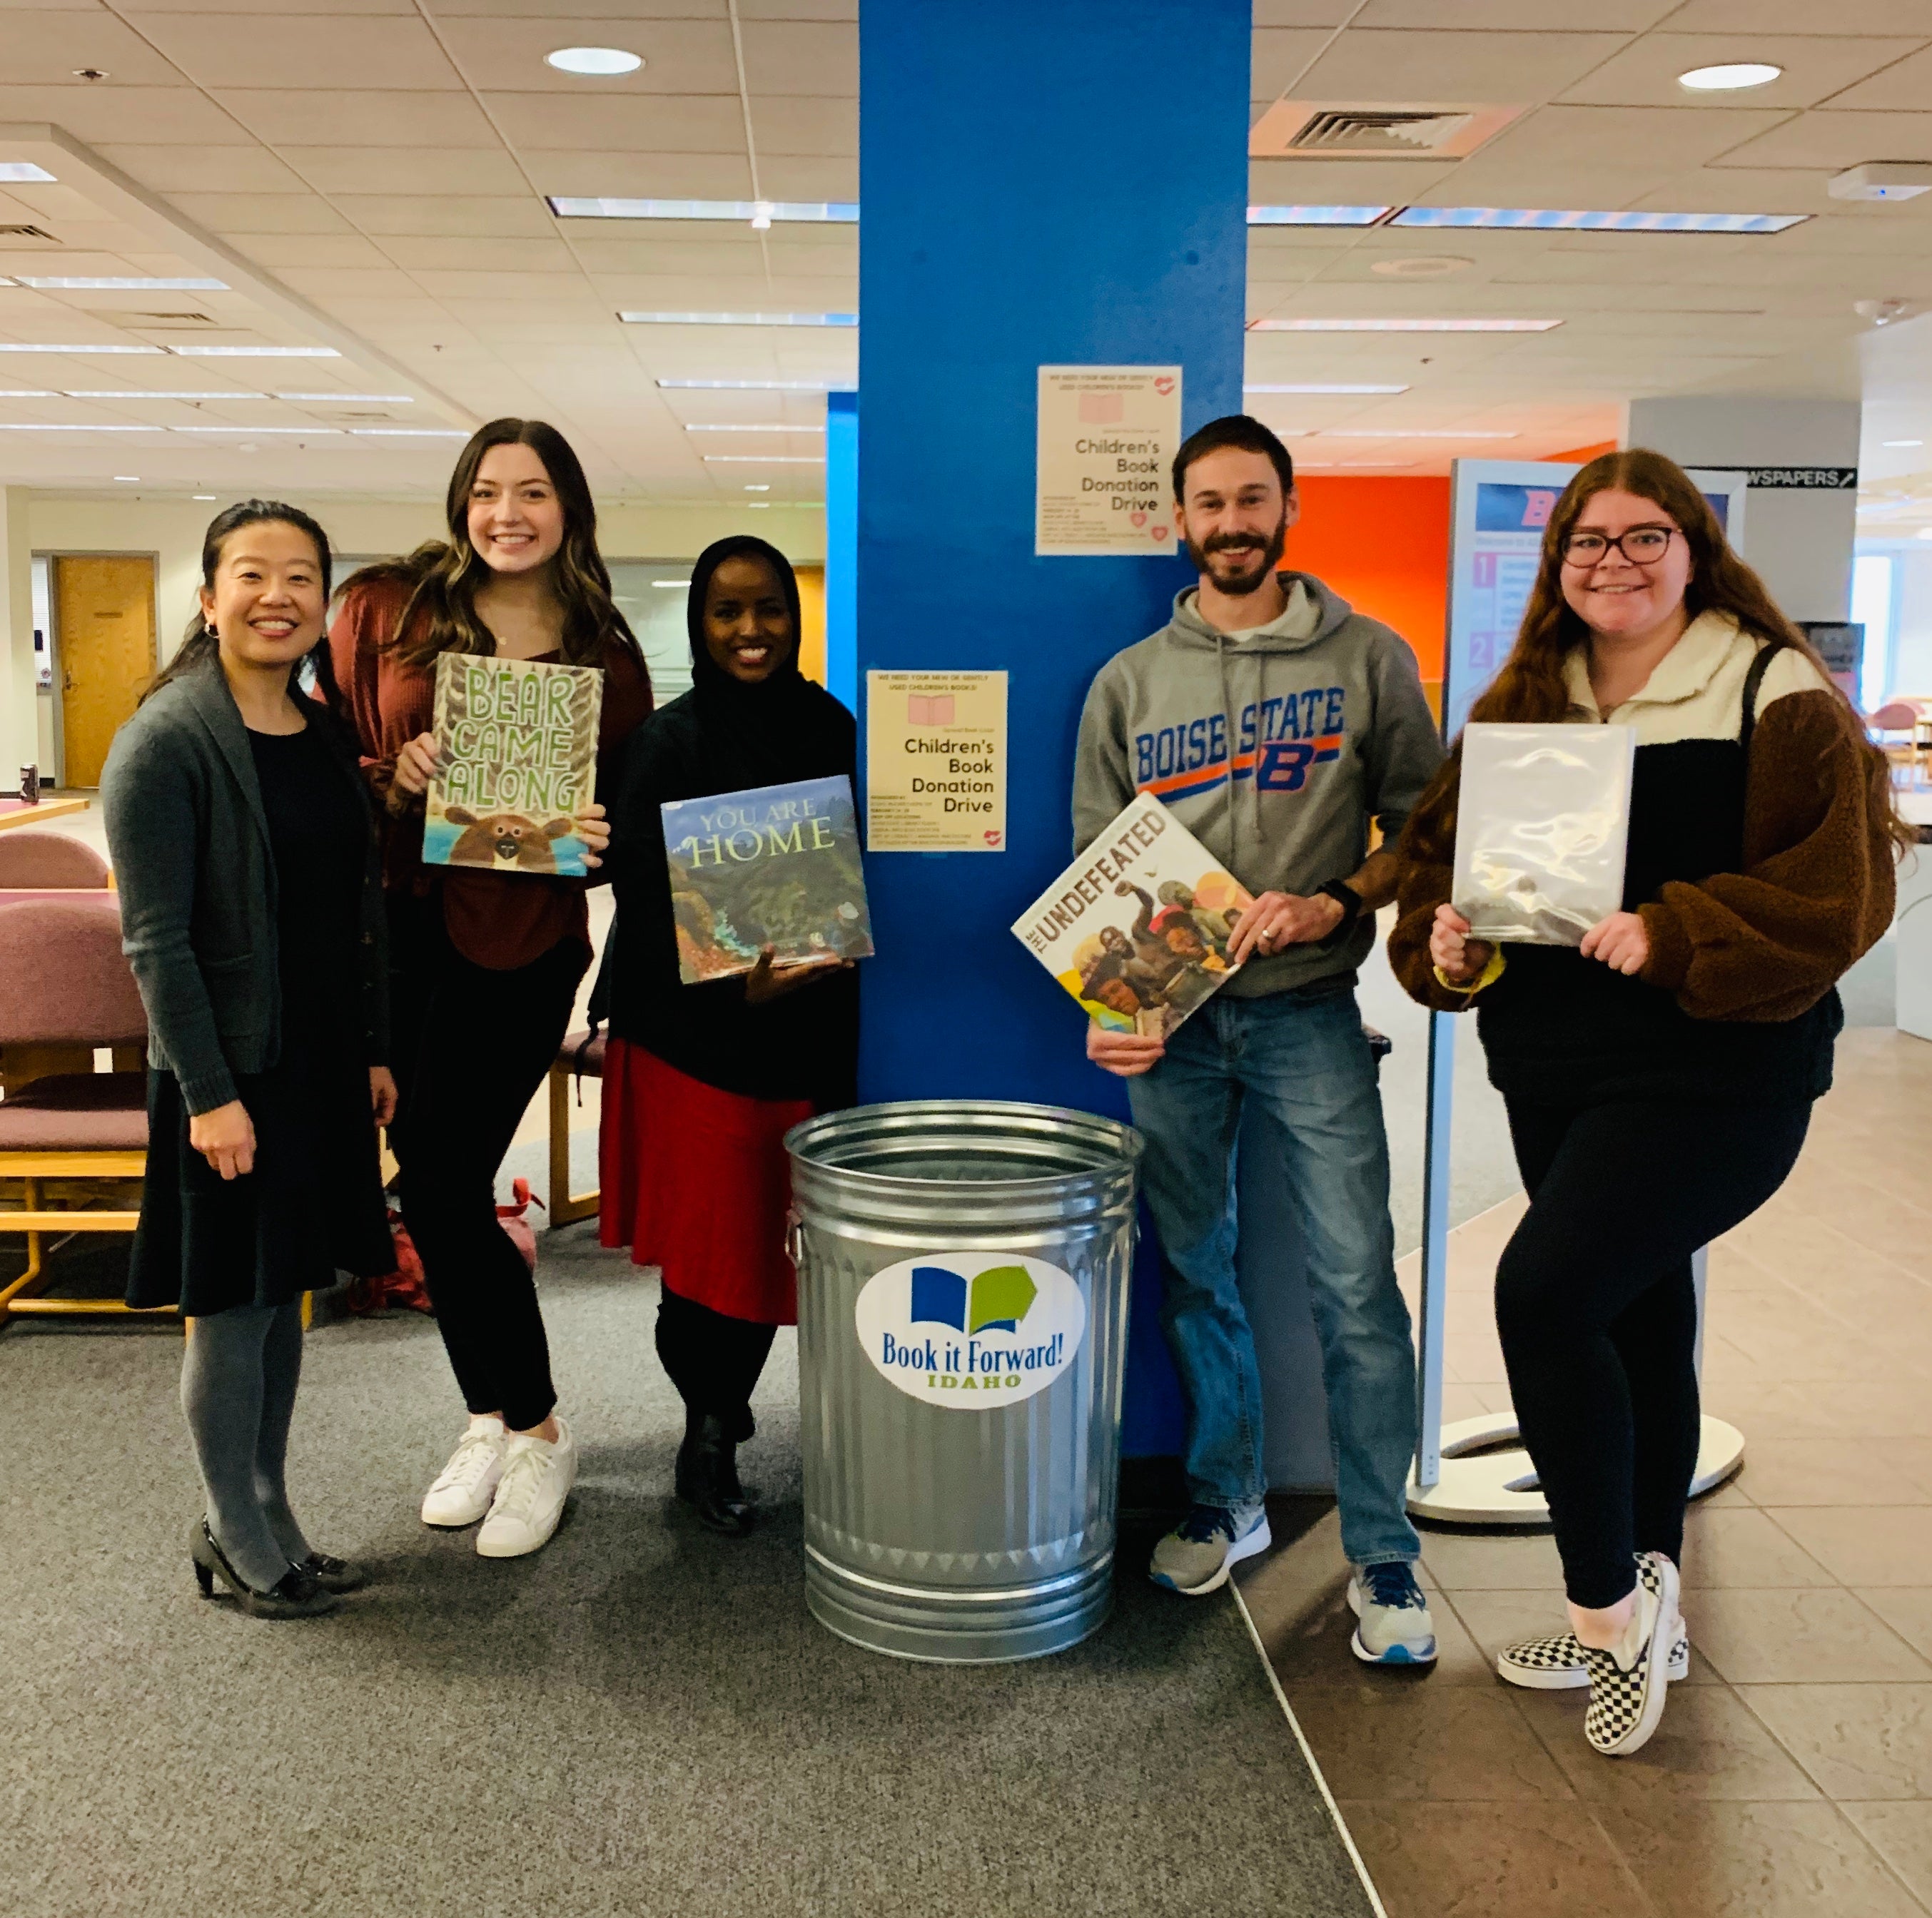 Students pose with books in front of Boot It Forward bin in Albertson's Library